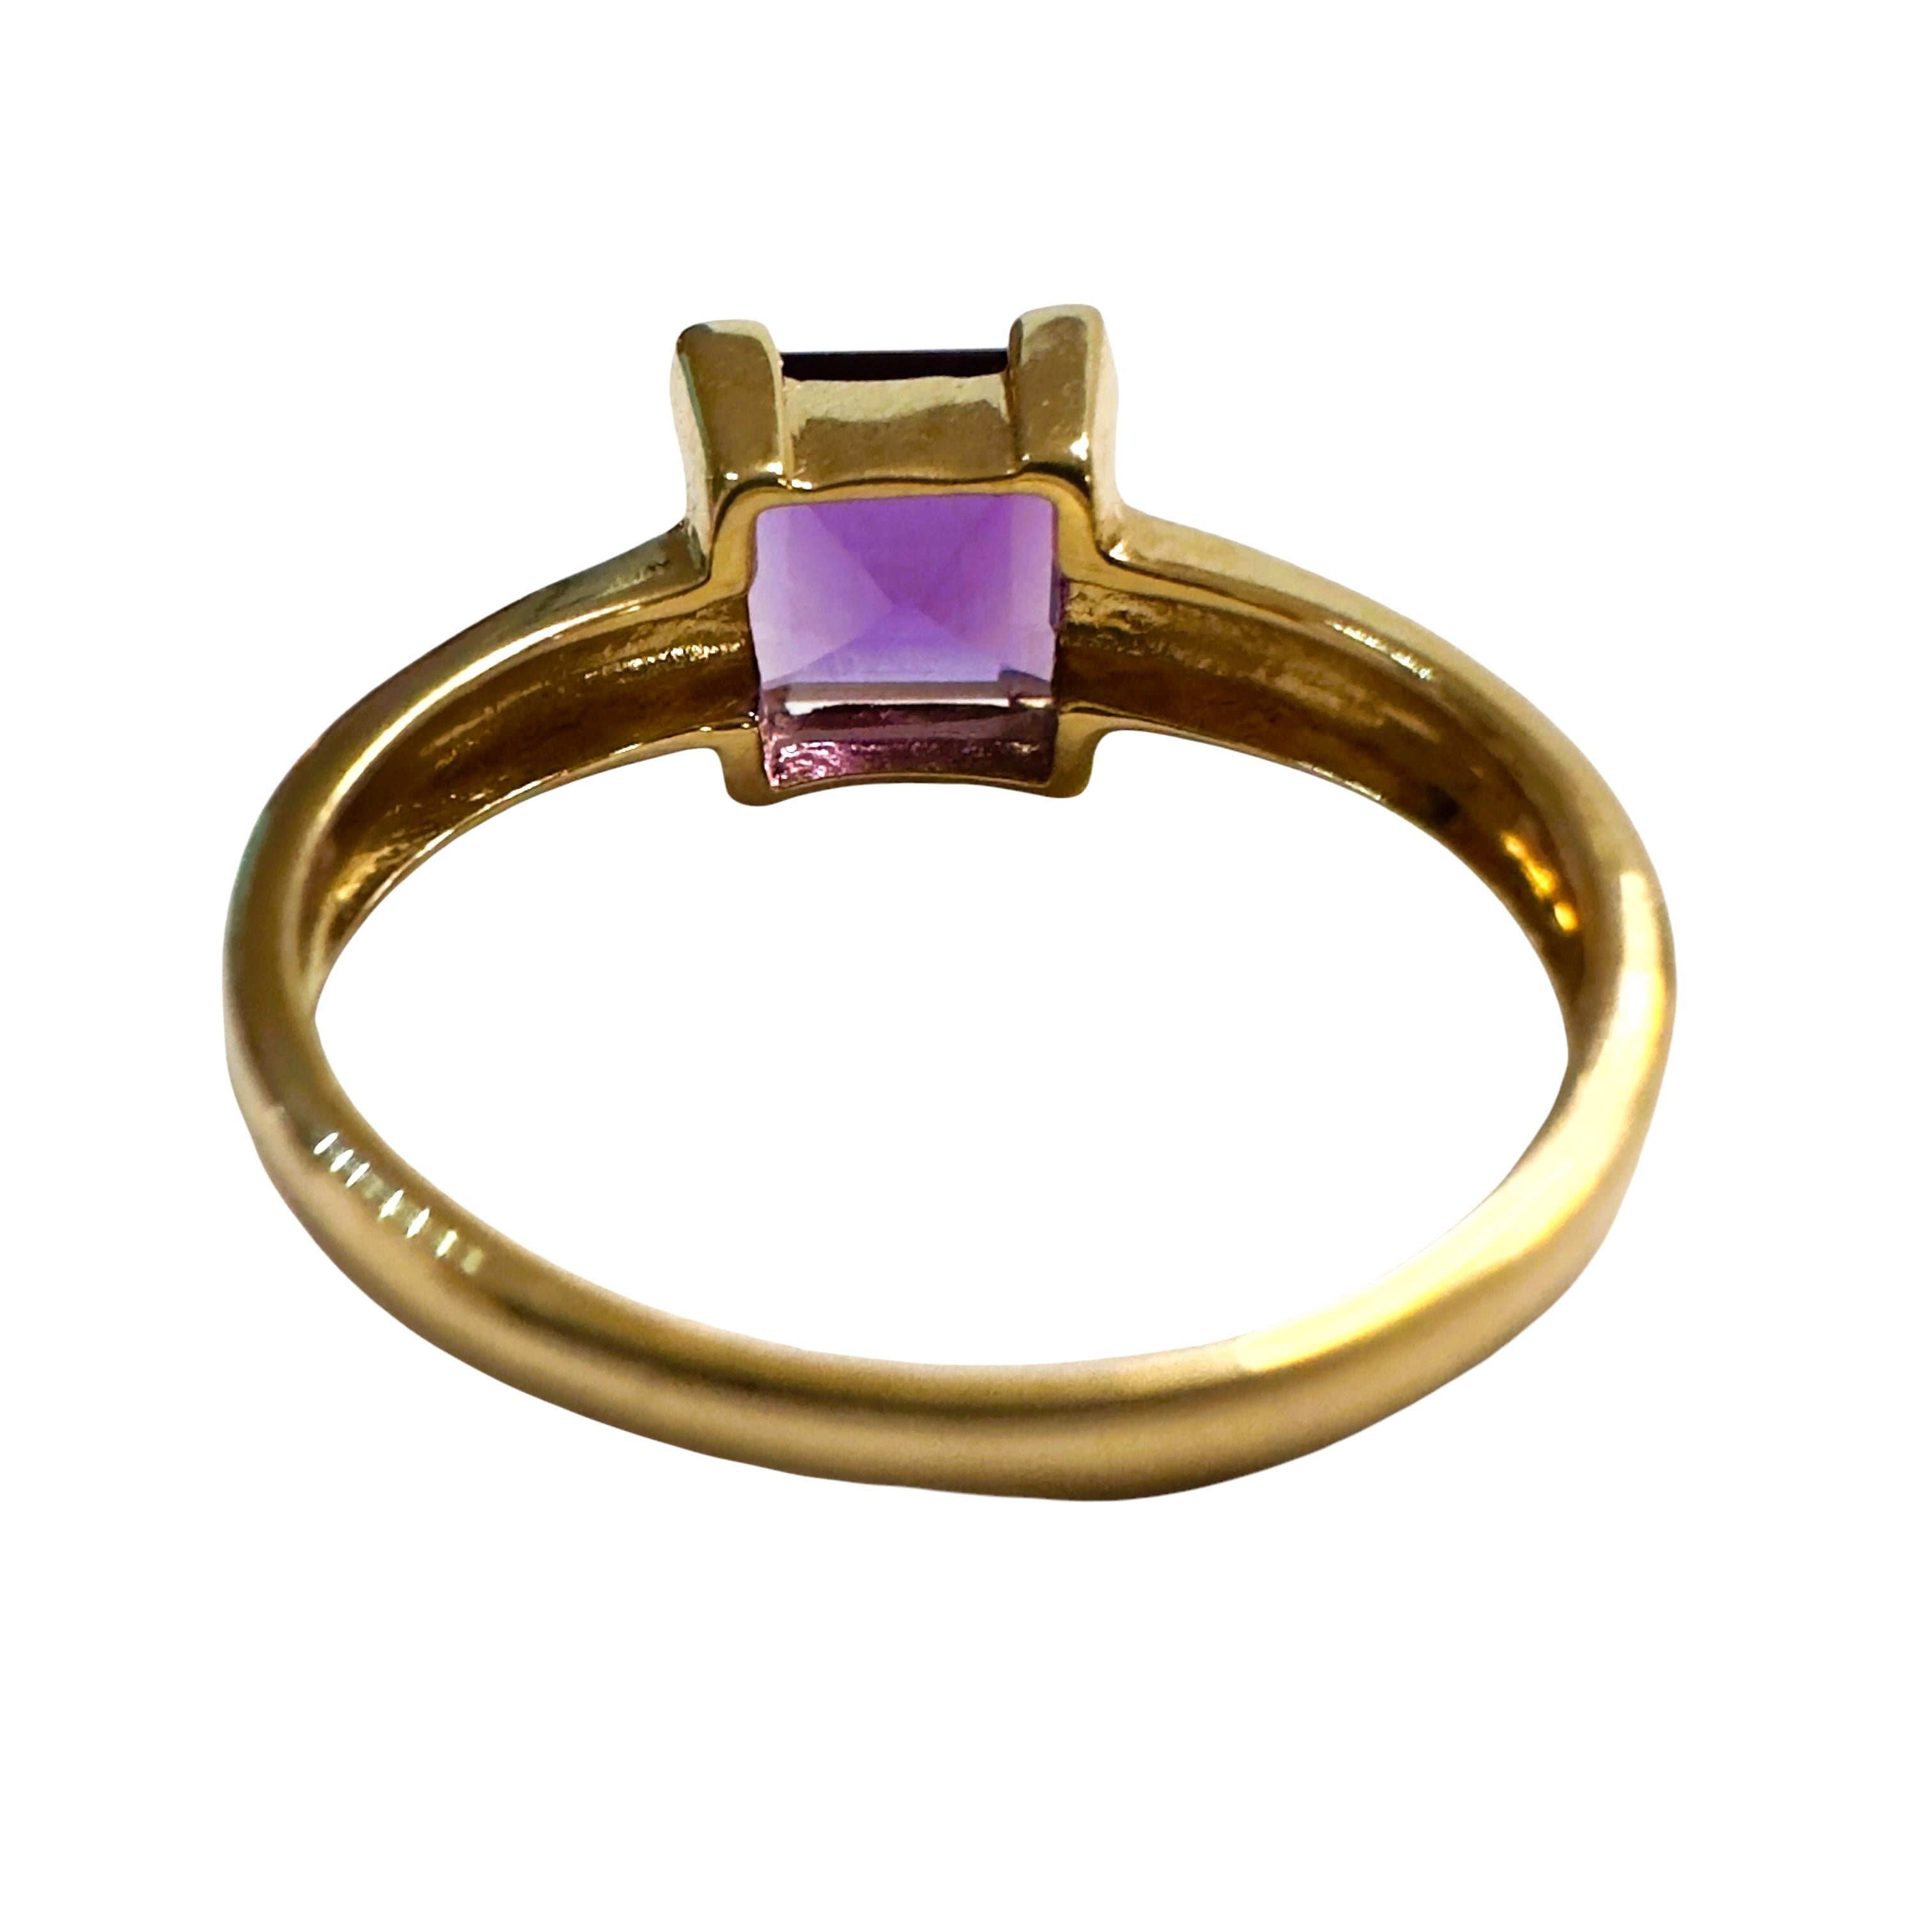 14k Yellow Gold Solitaire Amethyst Modernist Ring Size 6.75 In Excellent Condition For Sale In Eagan, MN